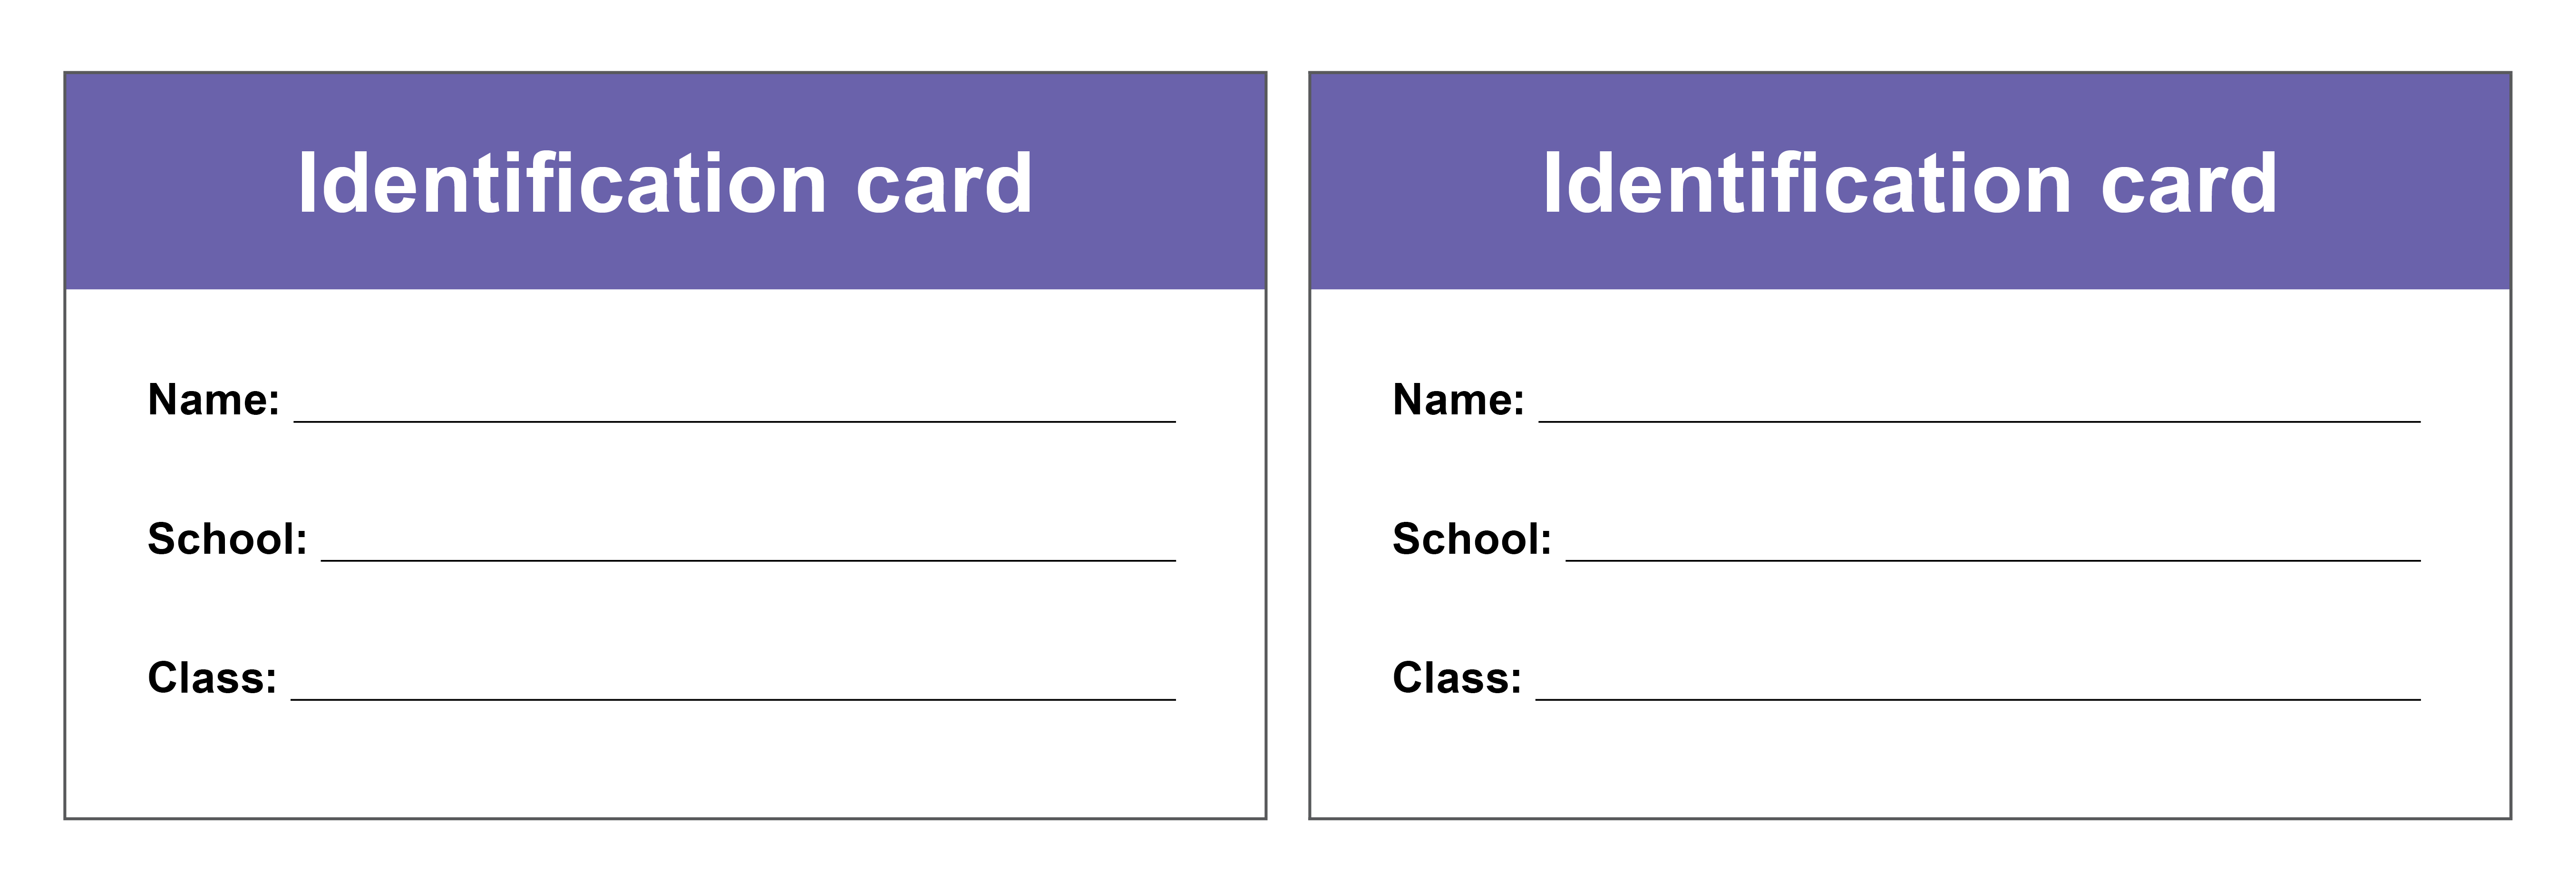 Two identification cards are displayed. On each card, students can write their name, school and class. 